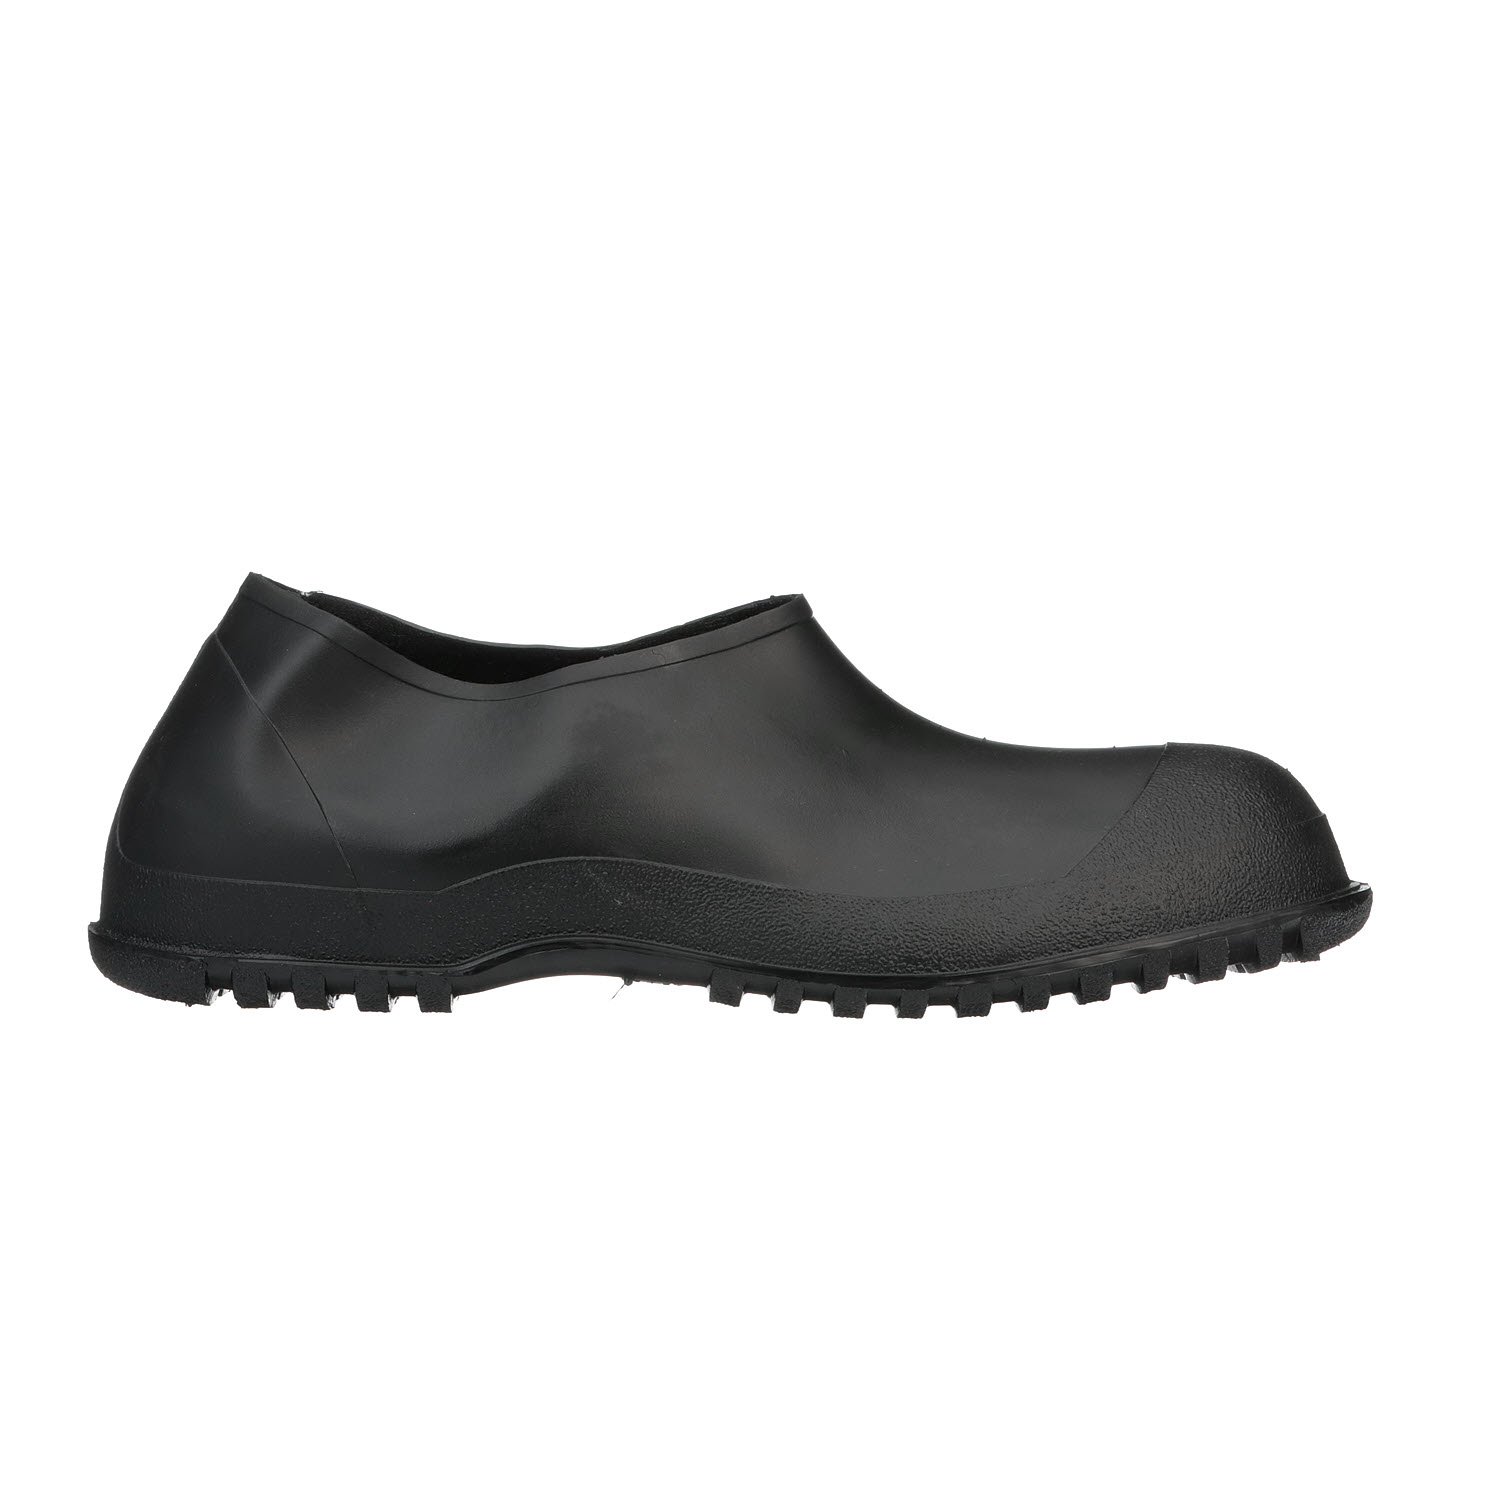 OVERSHOE PVC BLACK SMALL CLEATED (PR) - Overshoe: Ankle-High Rubber